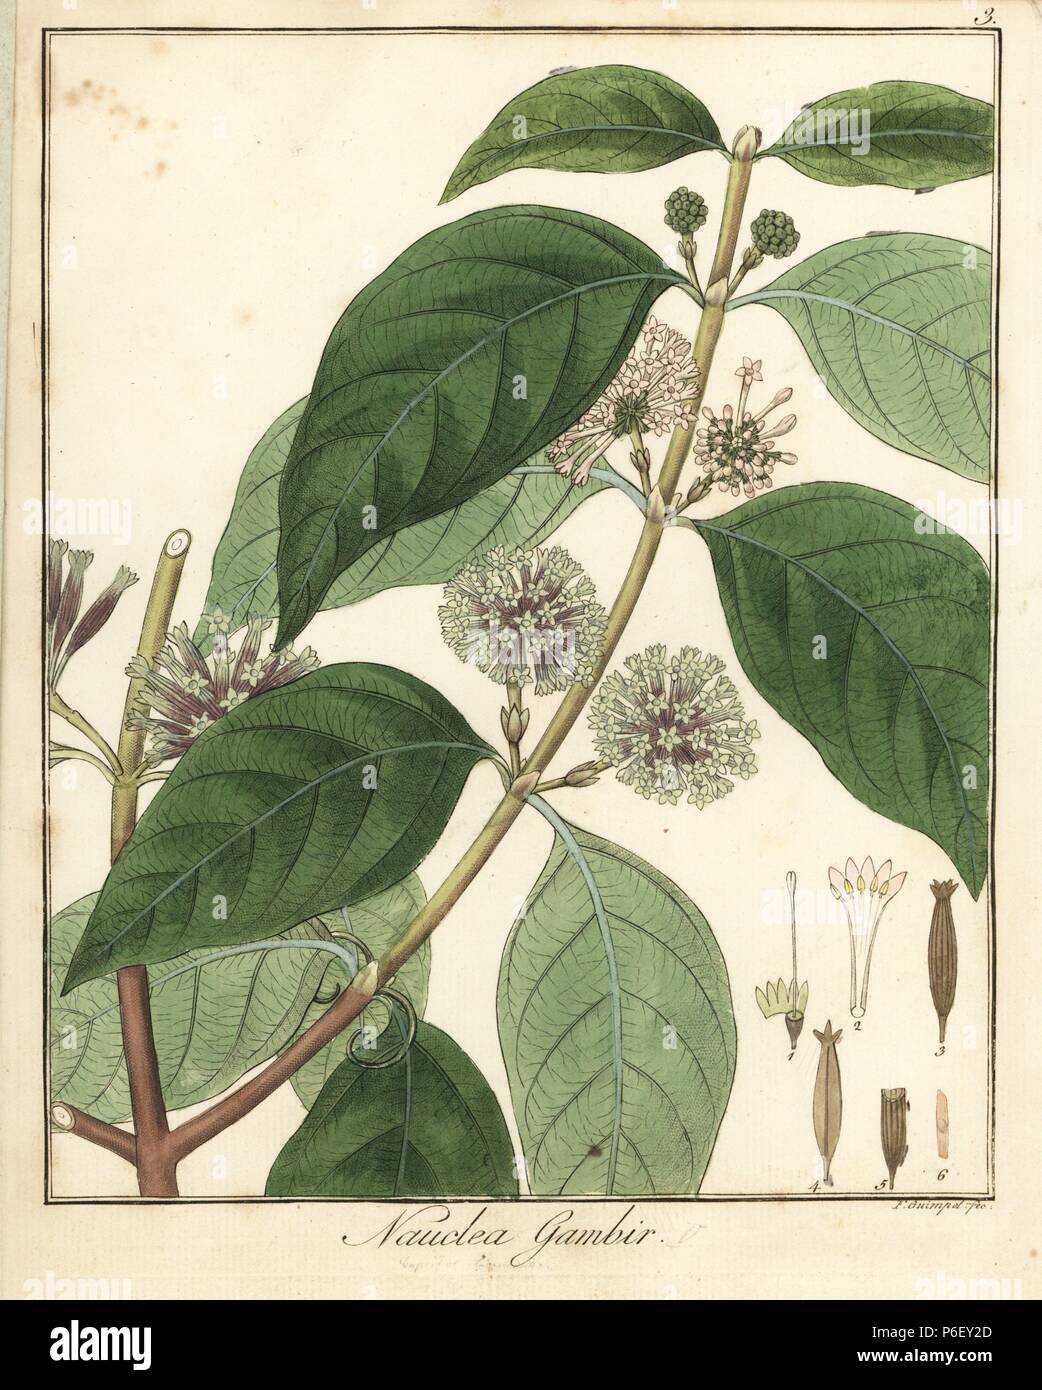 Gambir or gutta gambeer, Uncaria gambir. Handcoloured copperplate engraving by F. Guimpel from Dr. Friedrich Gottlob Hayne's Medical Botany, Berlin, 1822. Hayne (1763-1832) was a German botanist, apothecary and professor of pharmaceutical botany at Berlin University. Stock Photo